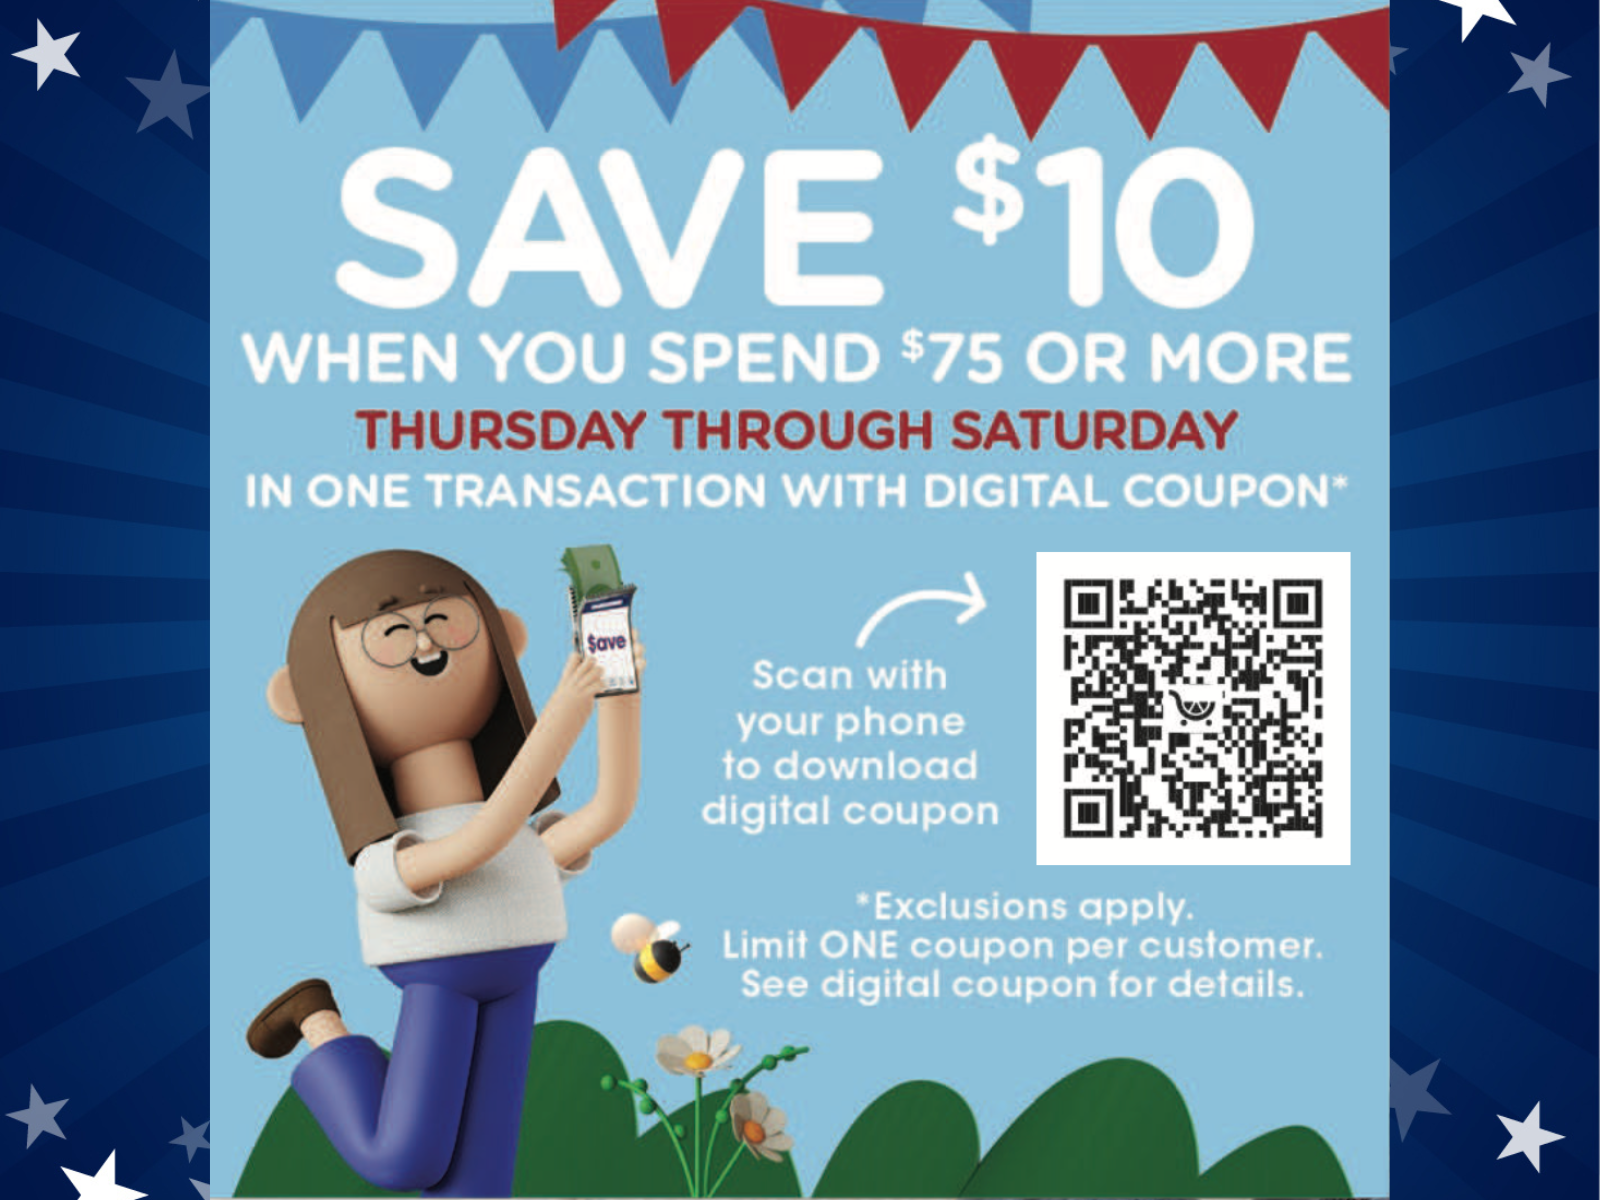 Save $10 When You Spend $75 Or More At Kroger With Digital Coupon